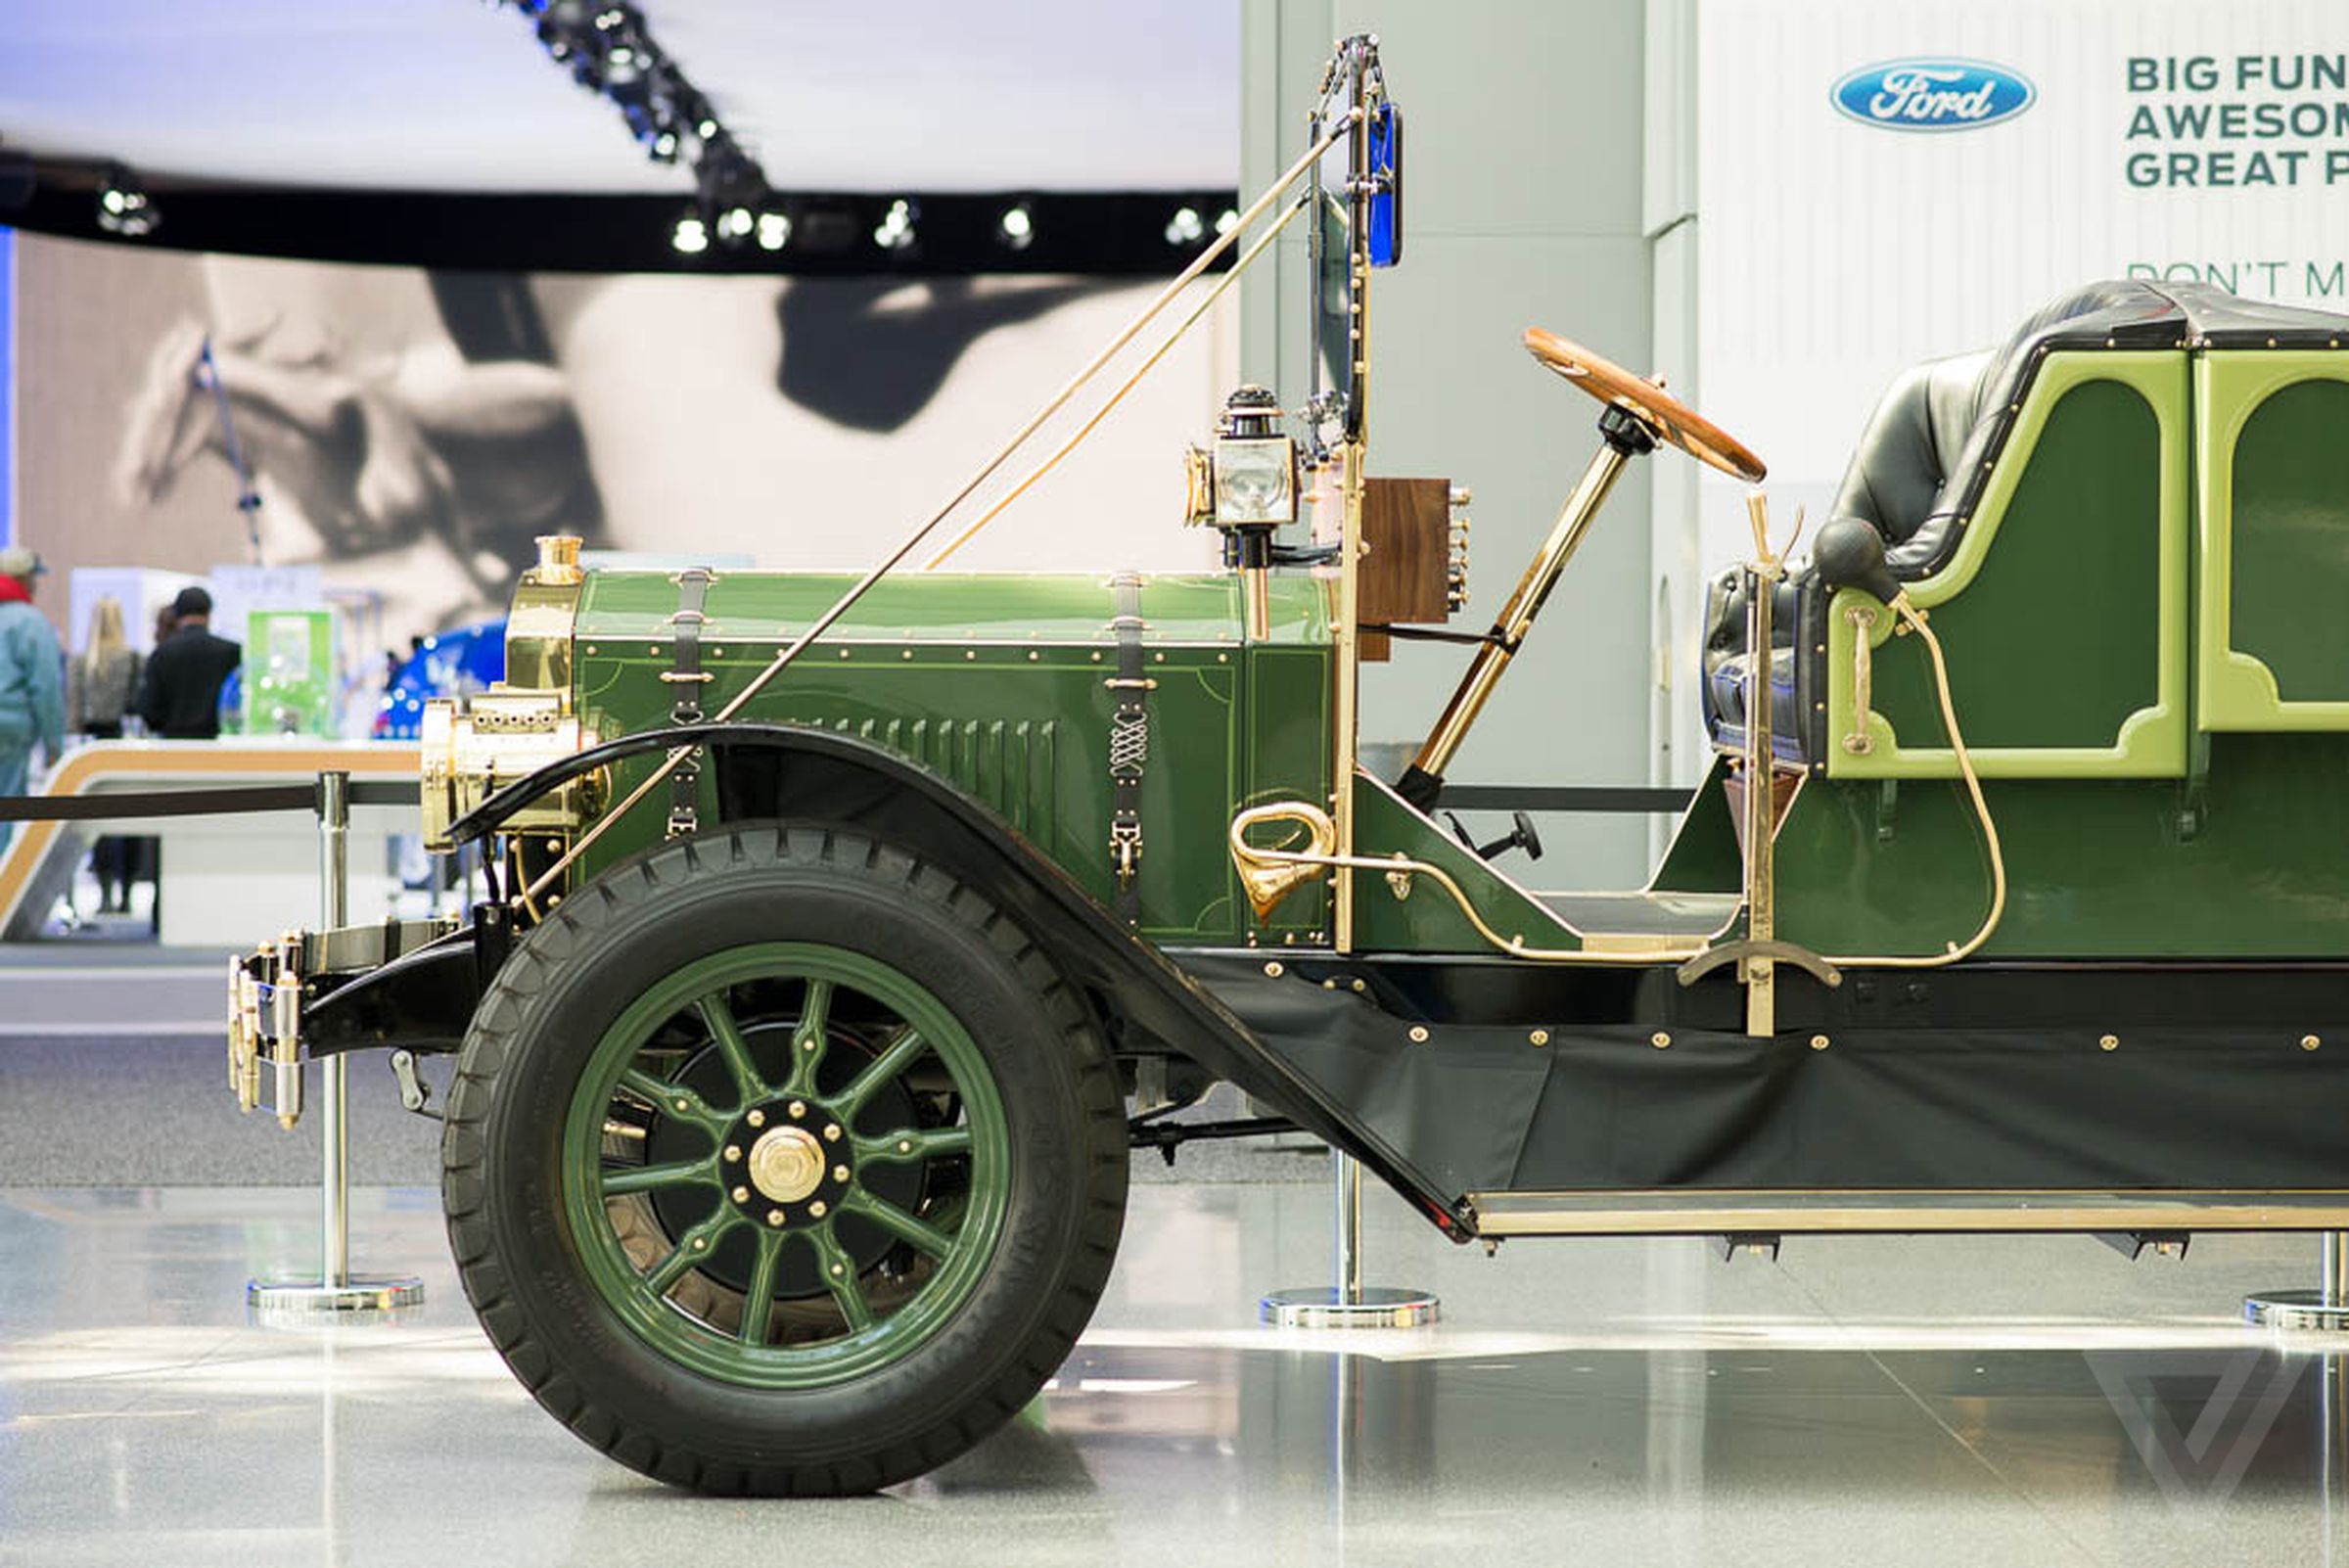 Electric-powered Horseless eCarriage pictures